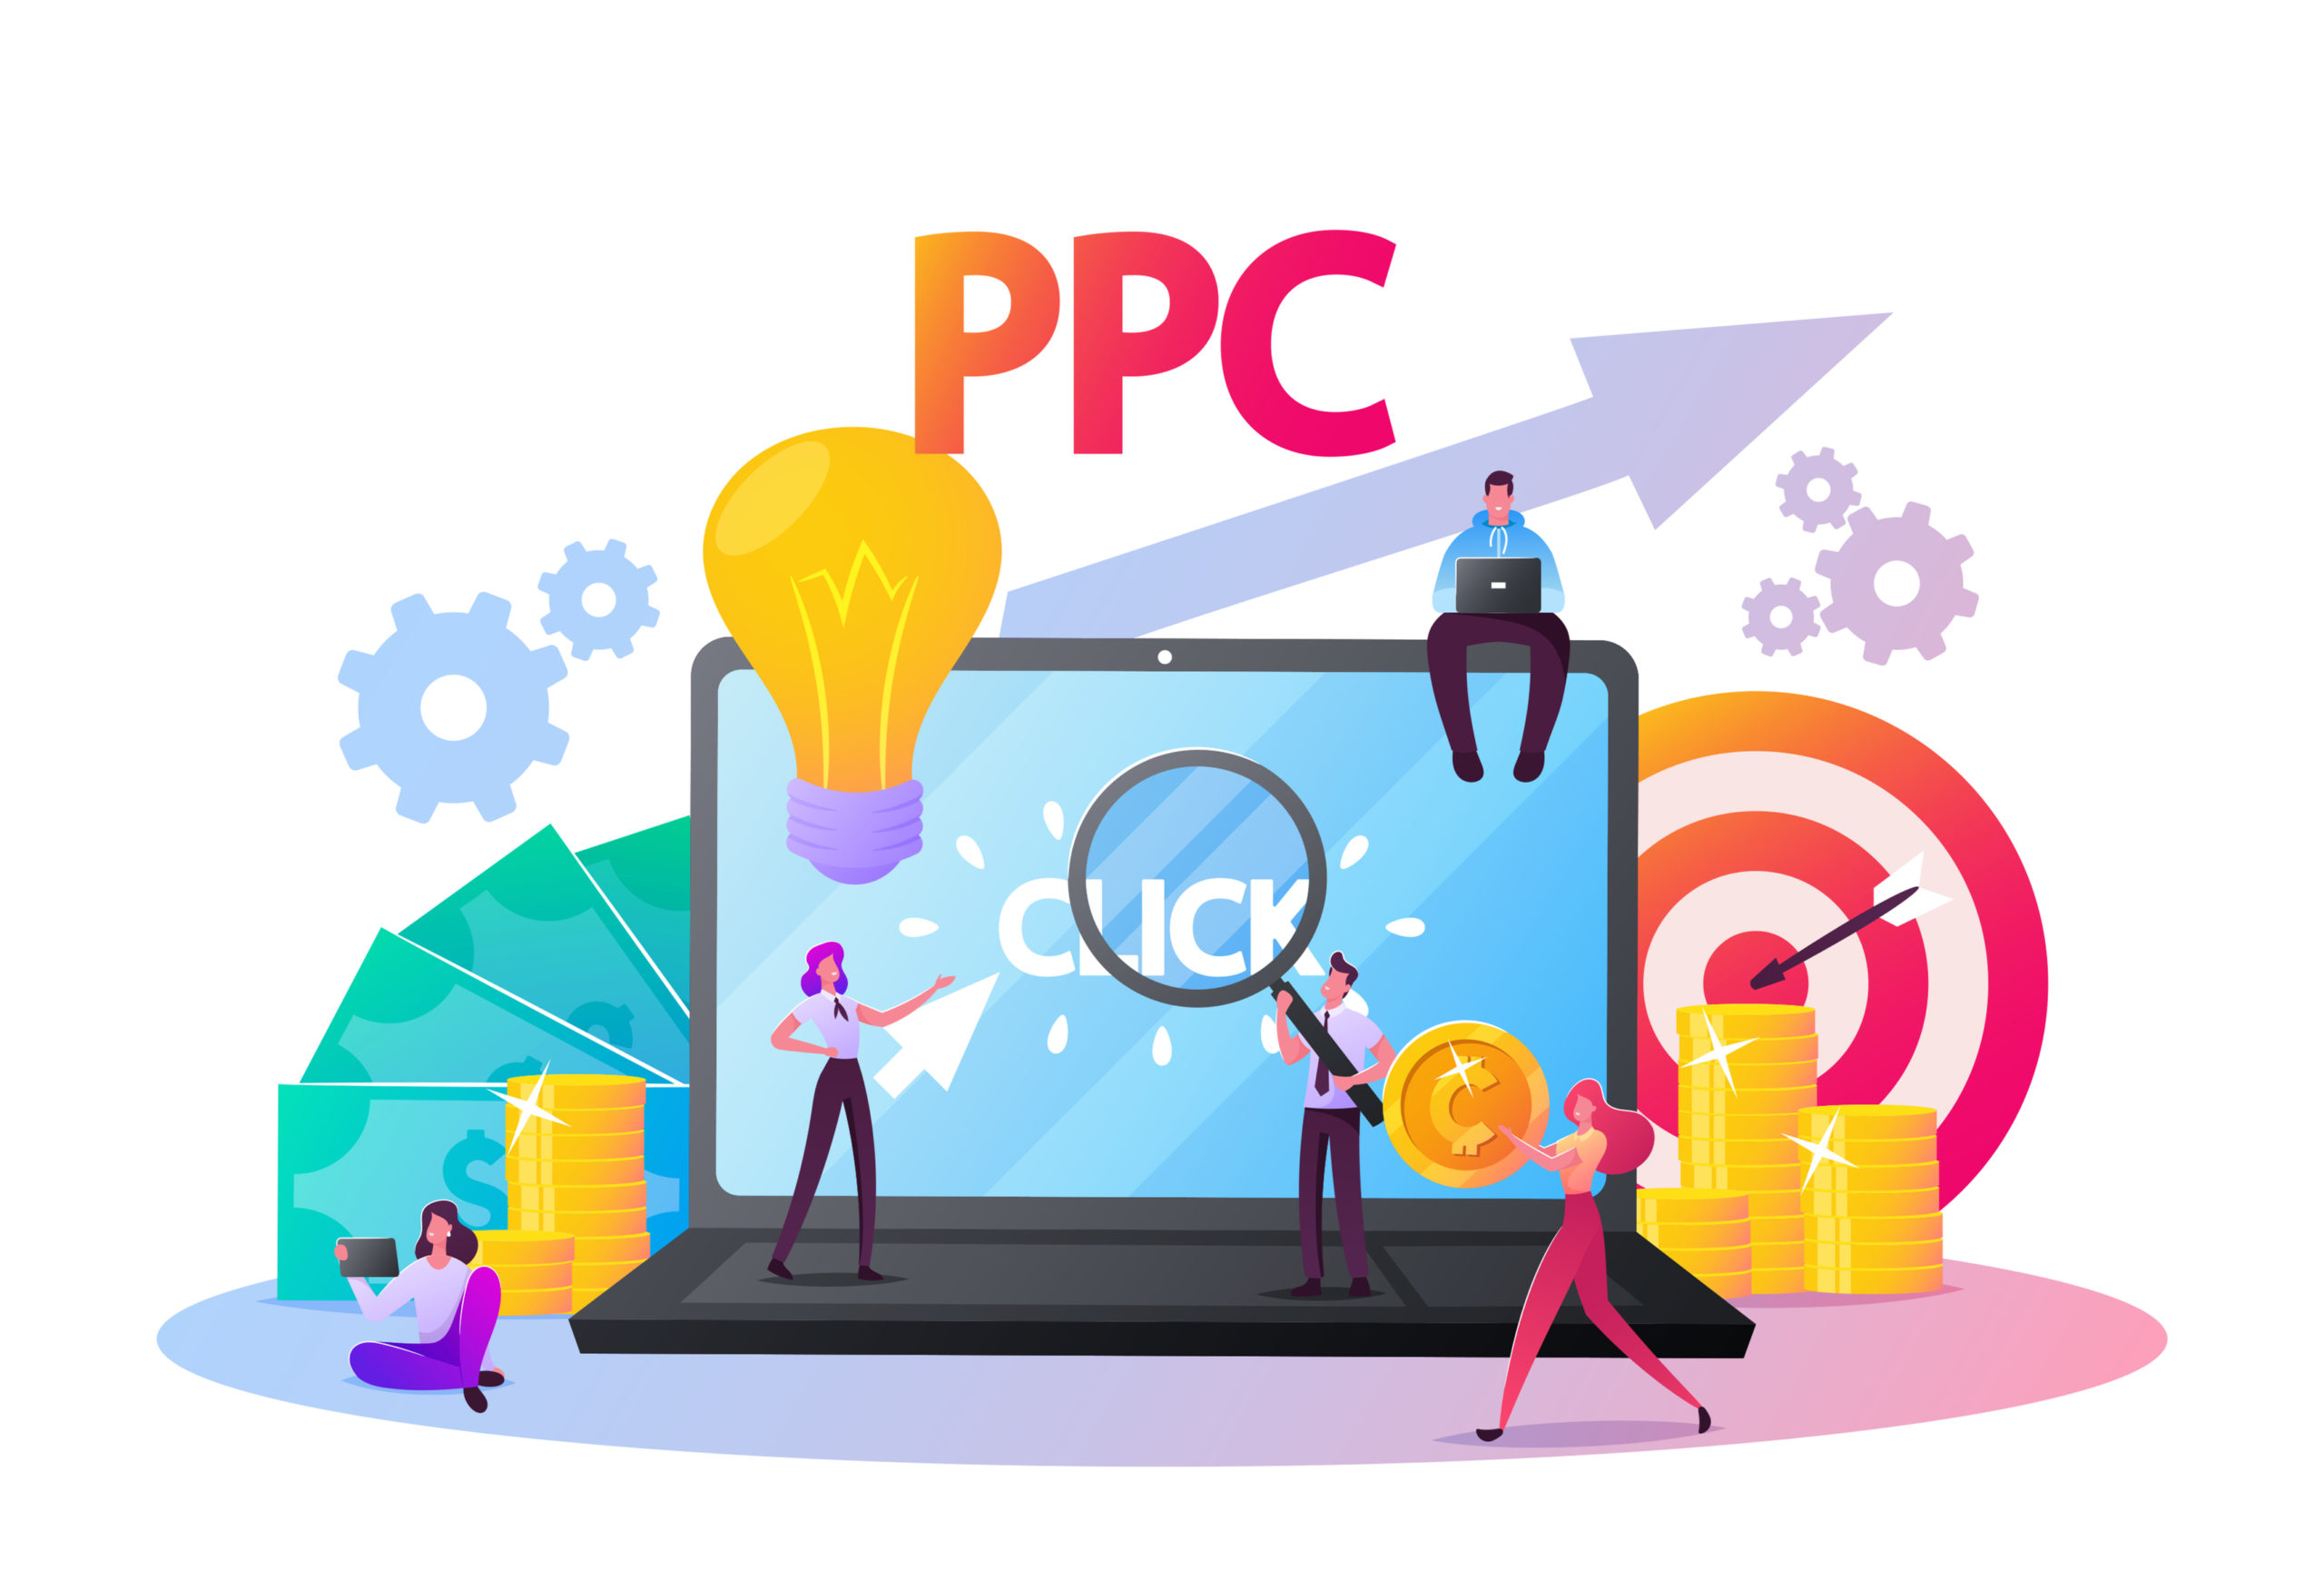  A group of people are working together to optimize a PPC campaign. They are using a laptop, a magnifying glass, and a light bulb to represent the ideas they are coming up with. The image also includes coins and a target to represent the money they are hoping to make and the goals they are trying to achieve.